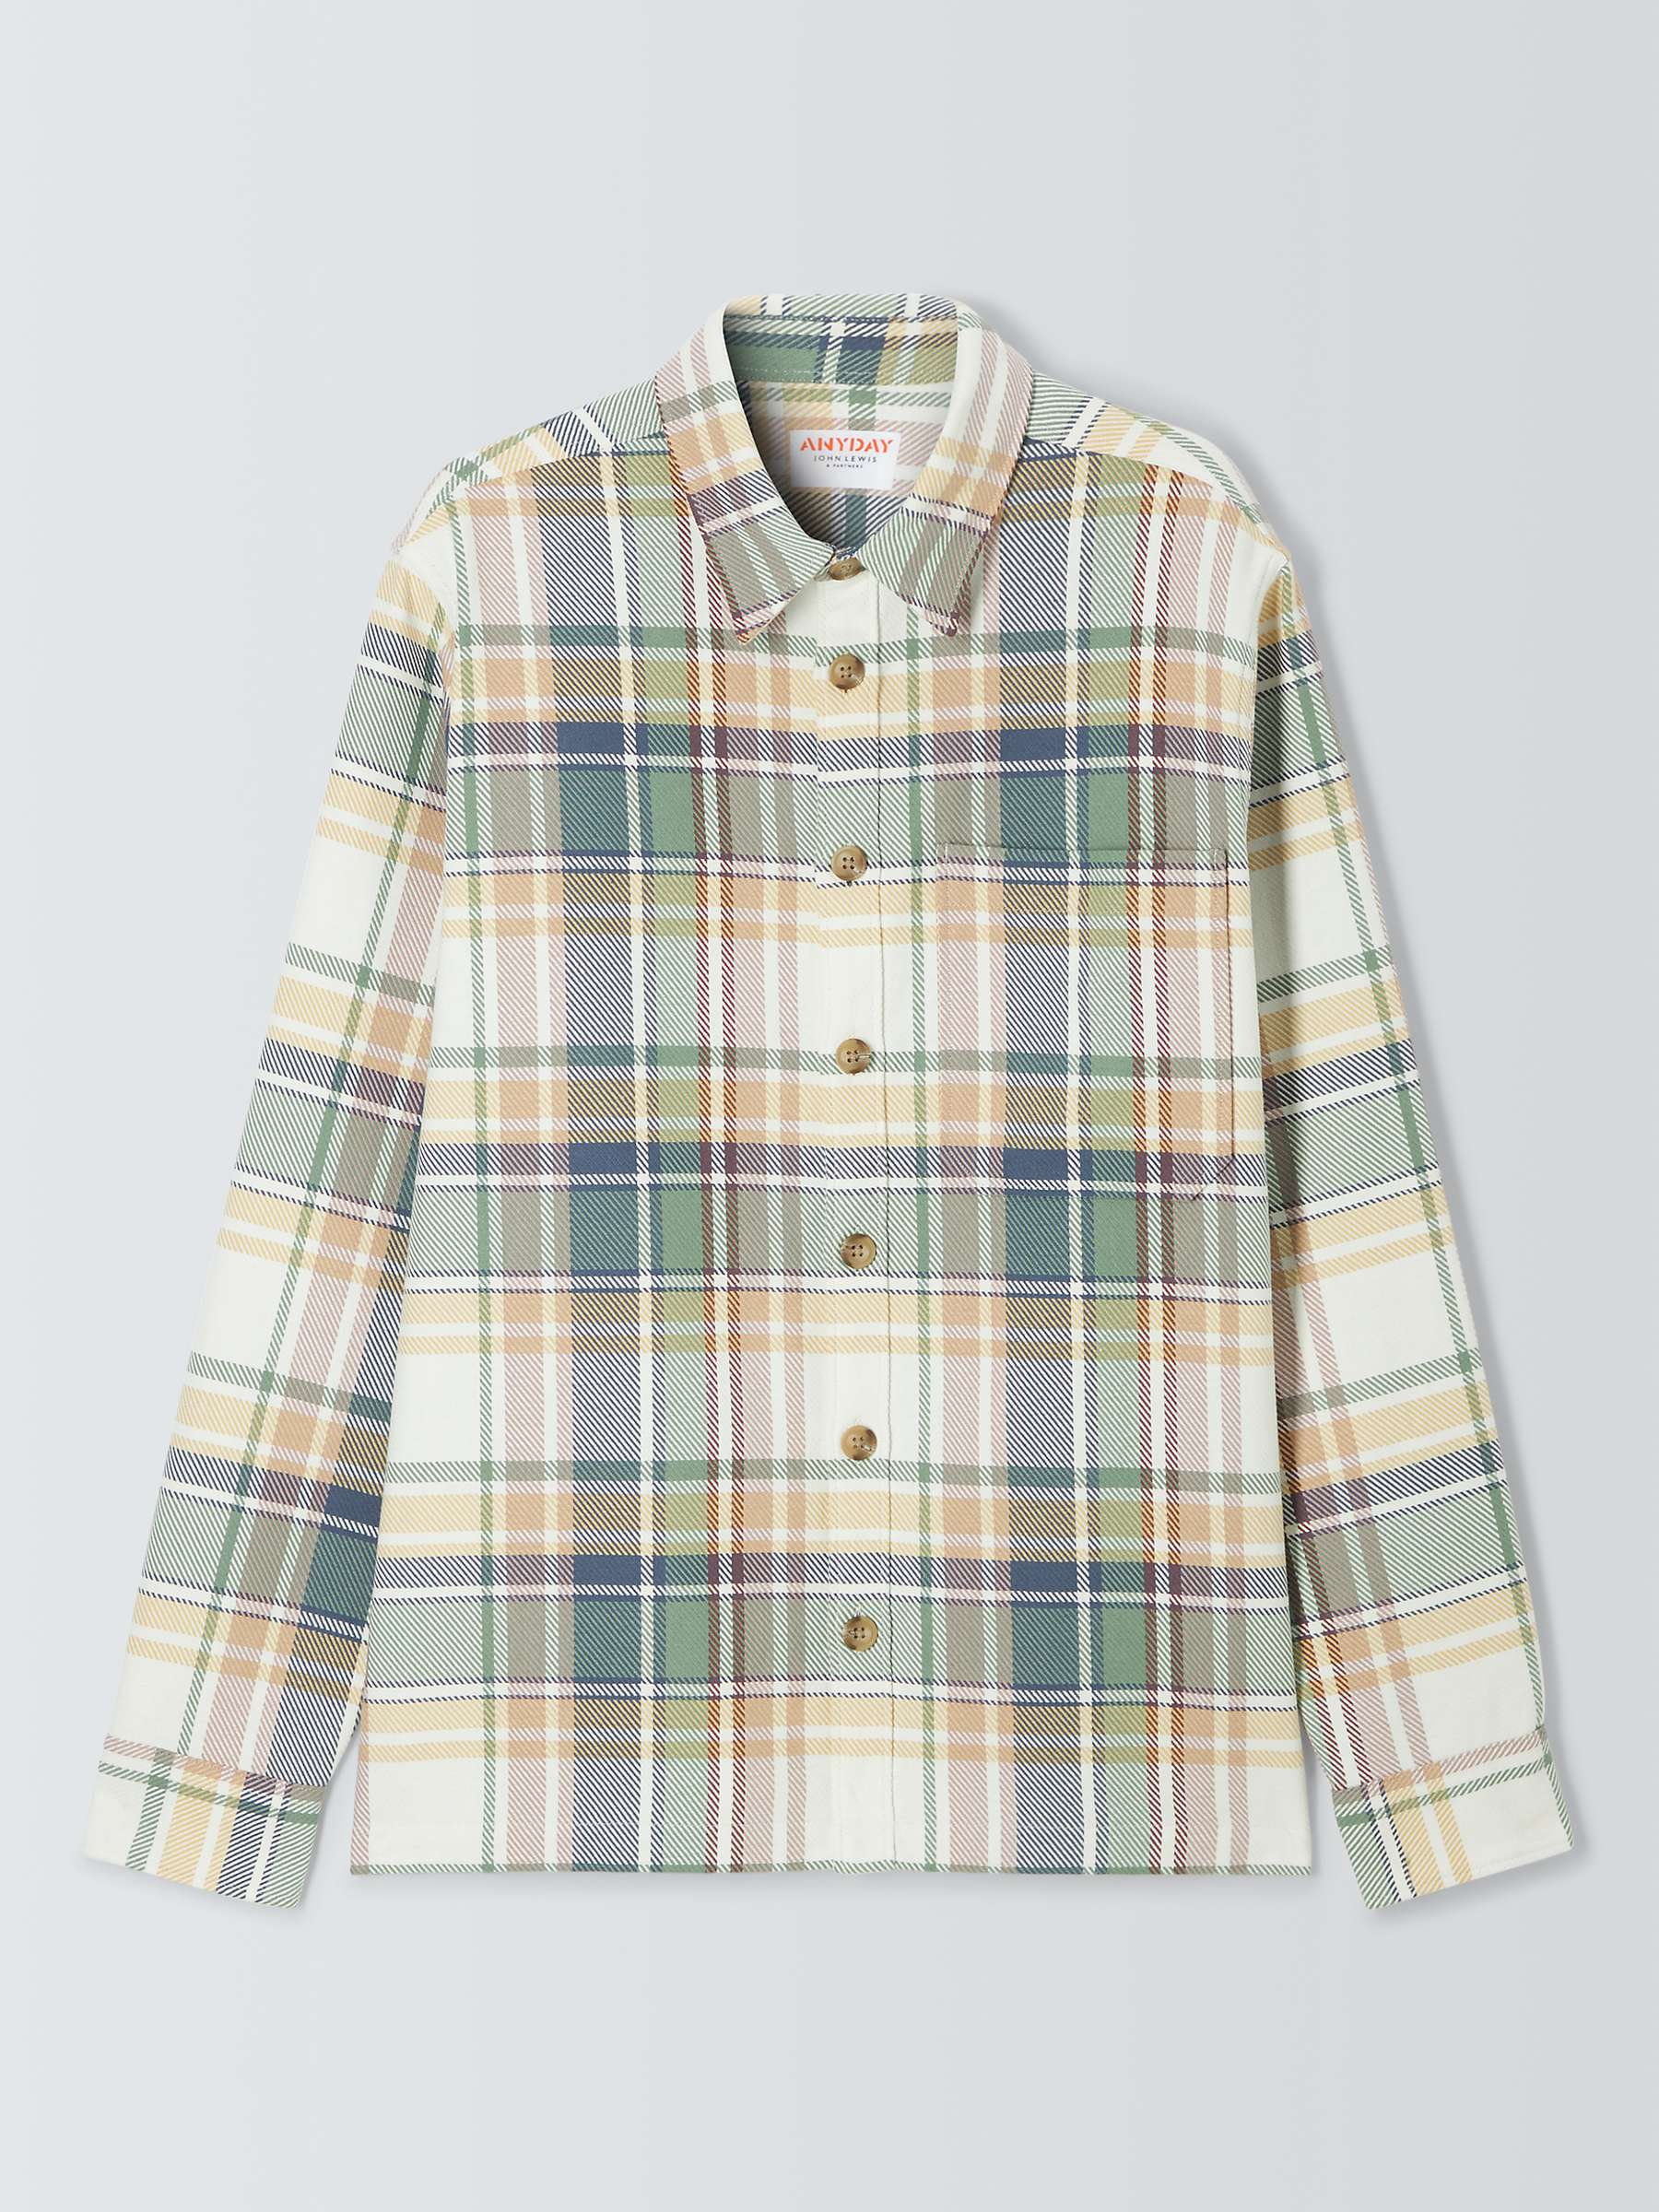 Buy ANYDAY Check Overshirt, Multi Online at johnlewis.com